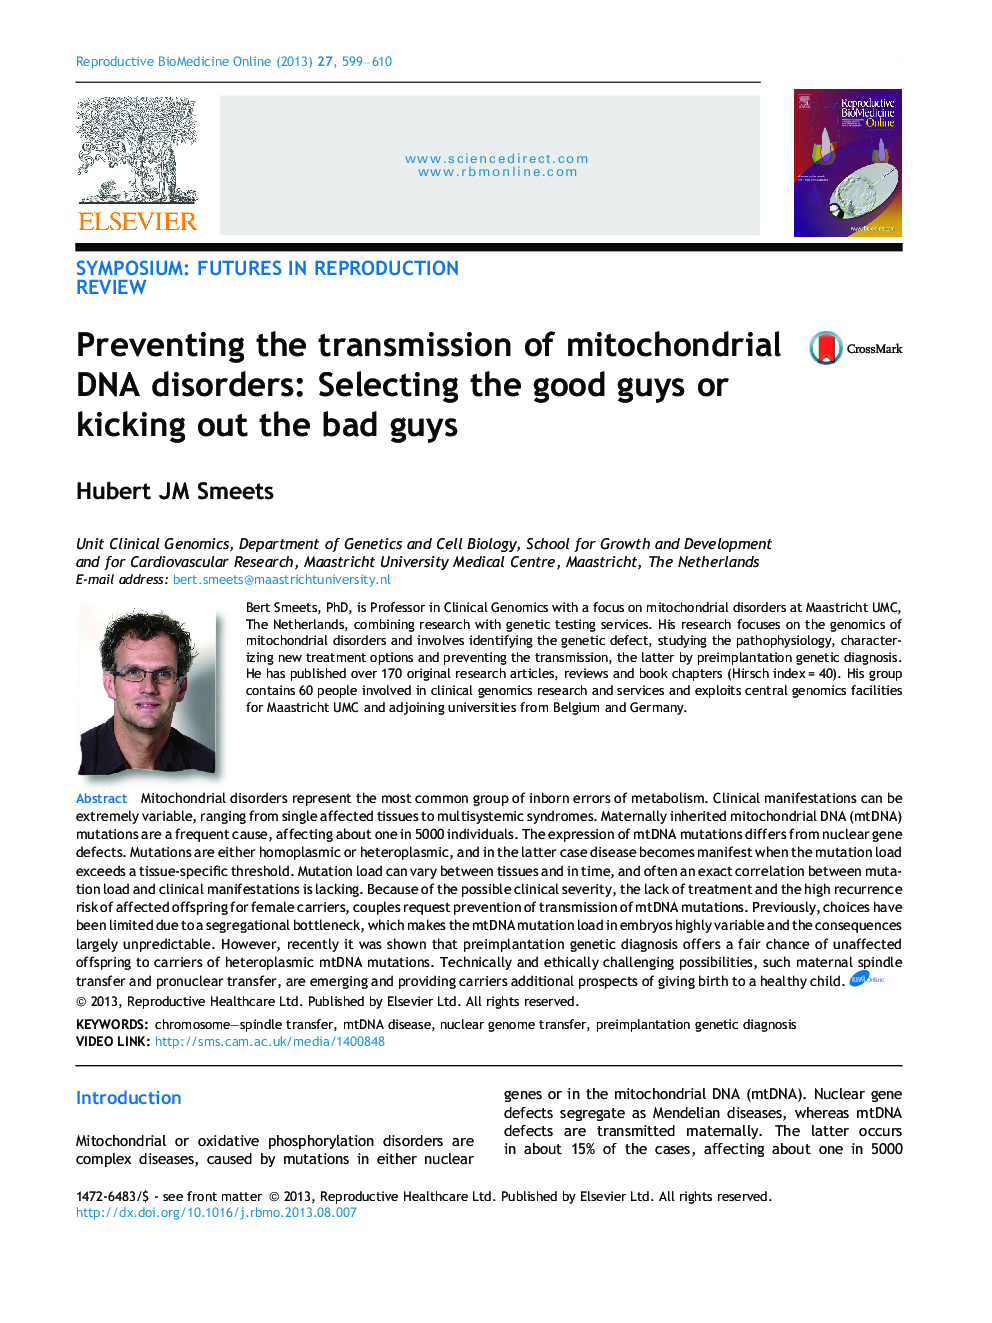 Preventing the transmission of mitochondrial DNA disorders: selecting the good guys or kicking out the bad guys 